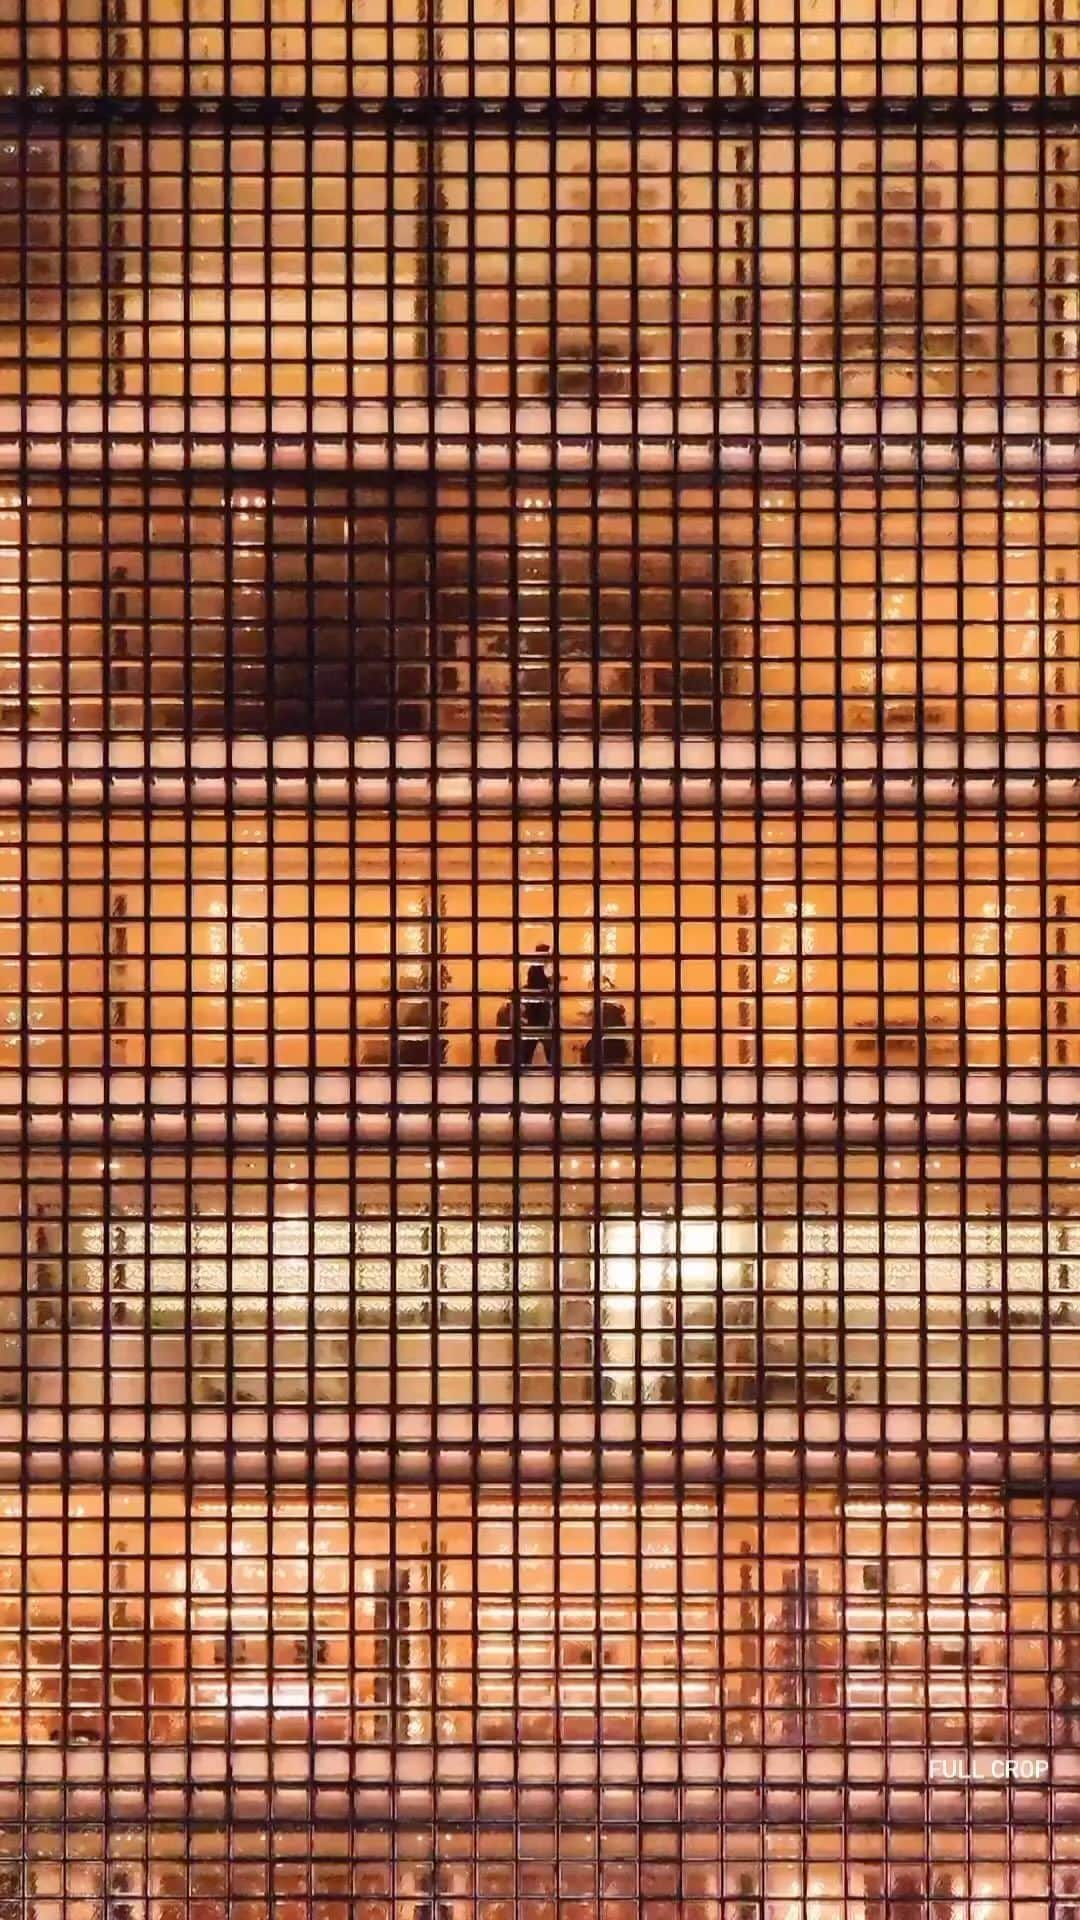 Promoting Tokyo Culture都庁文化振興部のインスタグラム：「The Ginza Maison Hermès building shines like a lantern light 🕯️ Designed by Italian architect Renzo Piano in 2001, the building is covered with approximately 15,000 highly transparent 45 cm² glass blocks, and the columns are kept as thin as possible, giving the building a beautiful appearance that brings even more sophistication and glamour to the streetscape of Ginza.  建物全体がまるでランタンの灯りのように輝く「銀座メゾンエルメス」🕯️ 2001年にイタリアの建築家 レンゾ・ピアノ氏が手がけました。 透明度の高い45cm四方のガラスブロック約15,000個で建物を覆い、柱も可能な限り細くとどめたその美しい佇まいは、銀座の街角により一層洗練された華やかさをもたらしています。  #tokyoartsandculture 📸: @itchban  #ginza #ginzamaisonhermes #tokyoarchitecture #銀座 #tokyotrip #tokyostreet #tokyophotography #tokyojapan  #tokyotokyo #culturetrip #explorejpn #japan_of_insta #japan_art_photography #japan_great_view #theculturetrip #japantrip #bestphoto_japan #thestreetphotographyhub  #nipponpic #japan_photo_now #tokyolife #discoverjapan #japanfocus #japanesestyle #unknownjapan #streetclassics #timeless_streets  #streetsnap #artphoto」